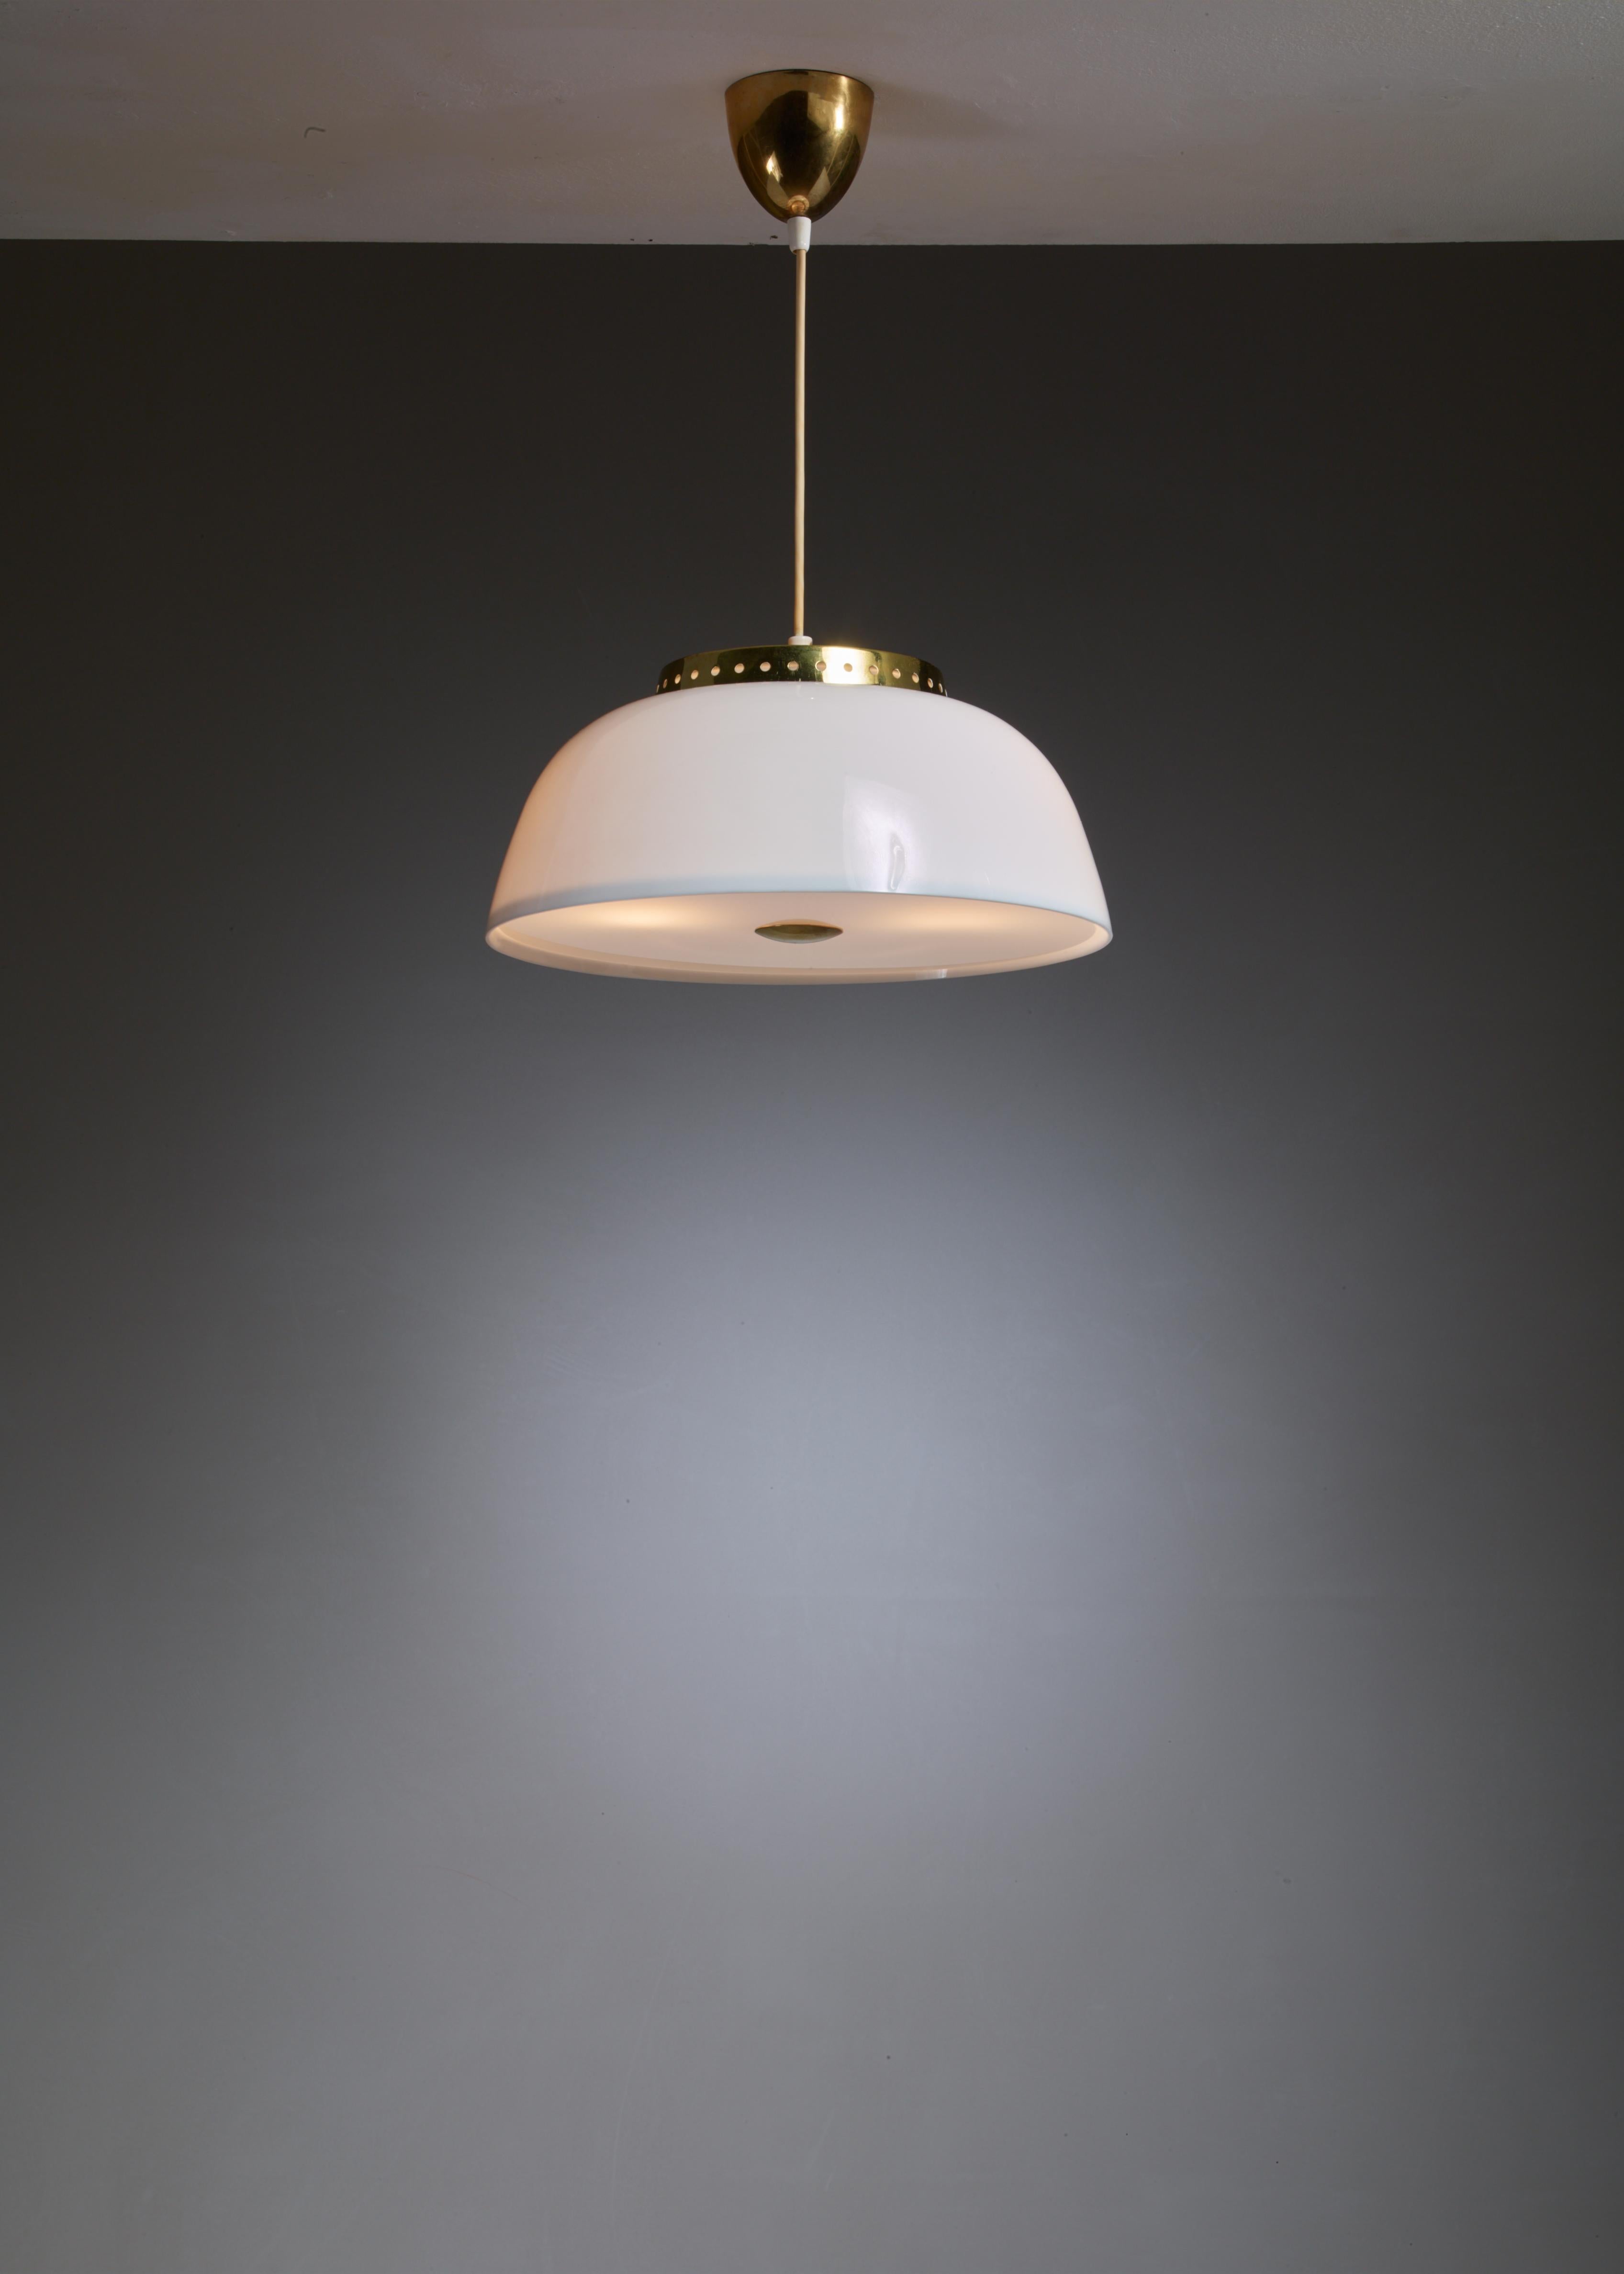 Scandinavian Modern Lisa Johansson-Pape White Acrylic and Brass Pendant for Orno, Finland, 1950s For Sale